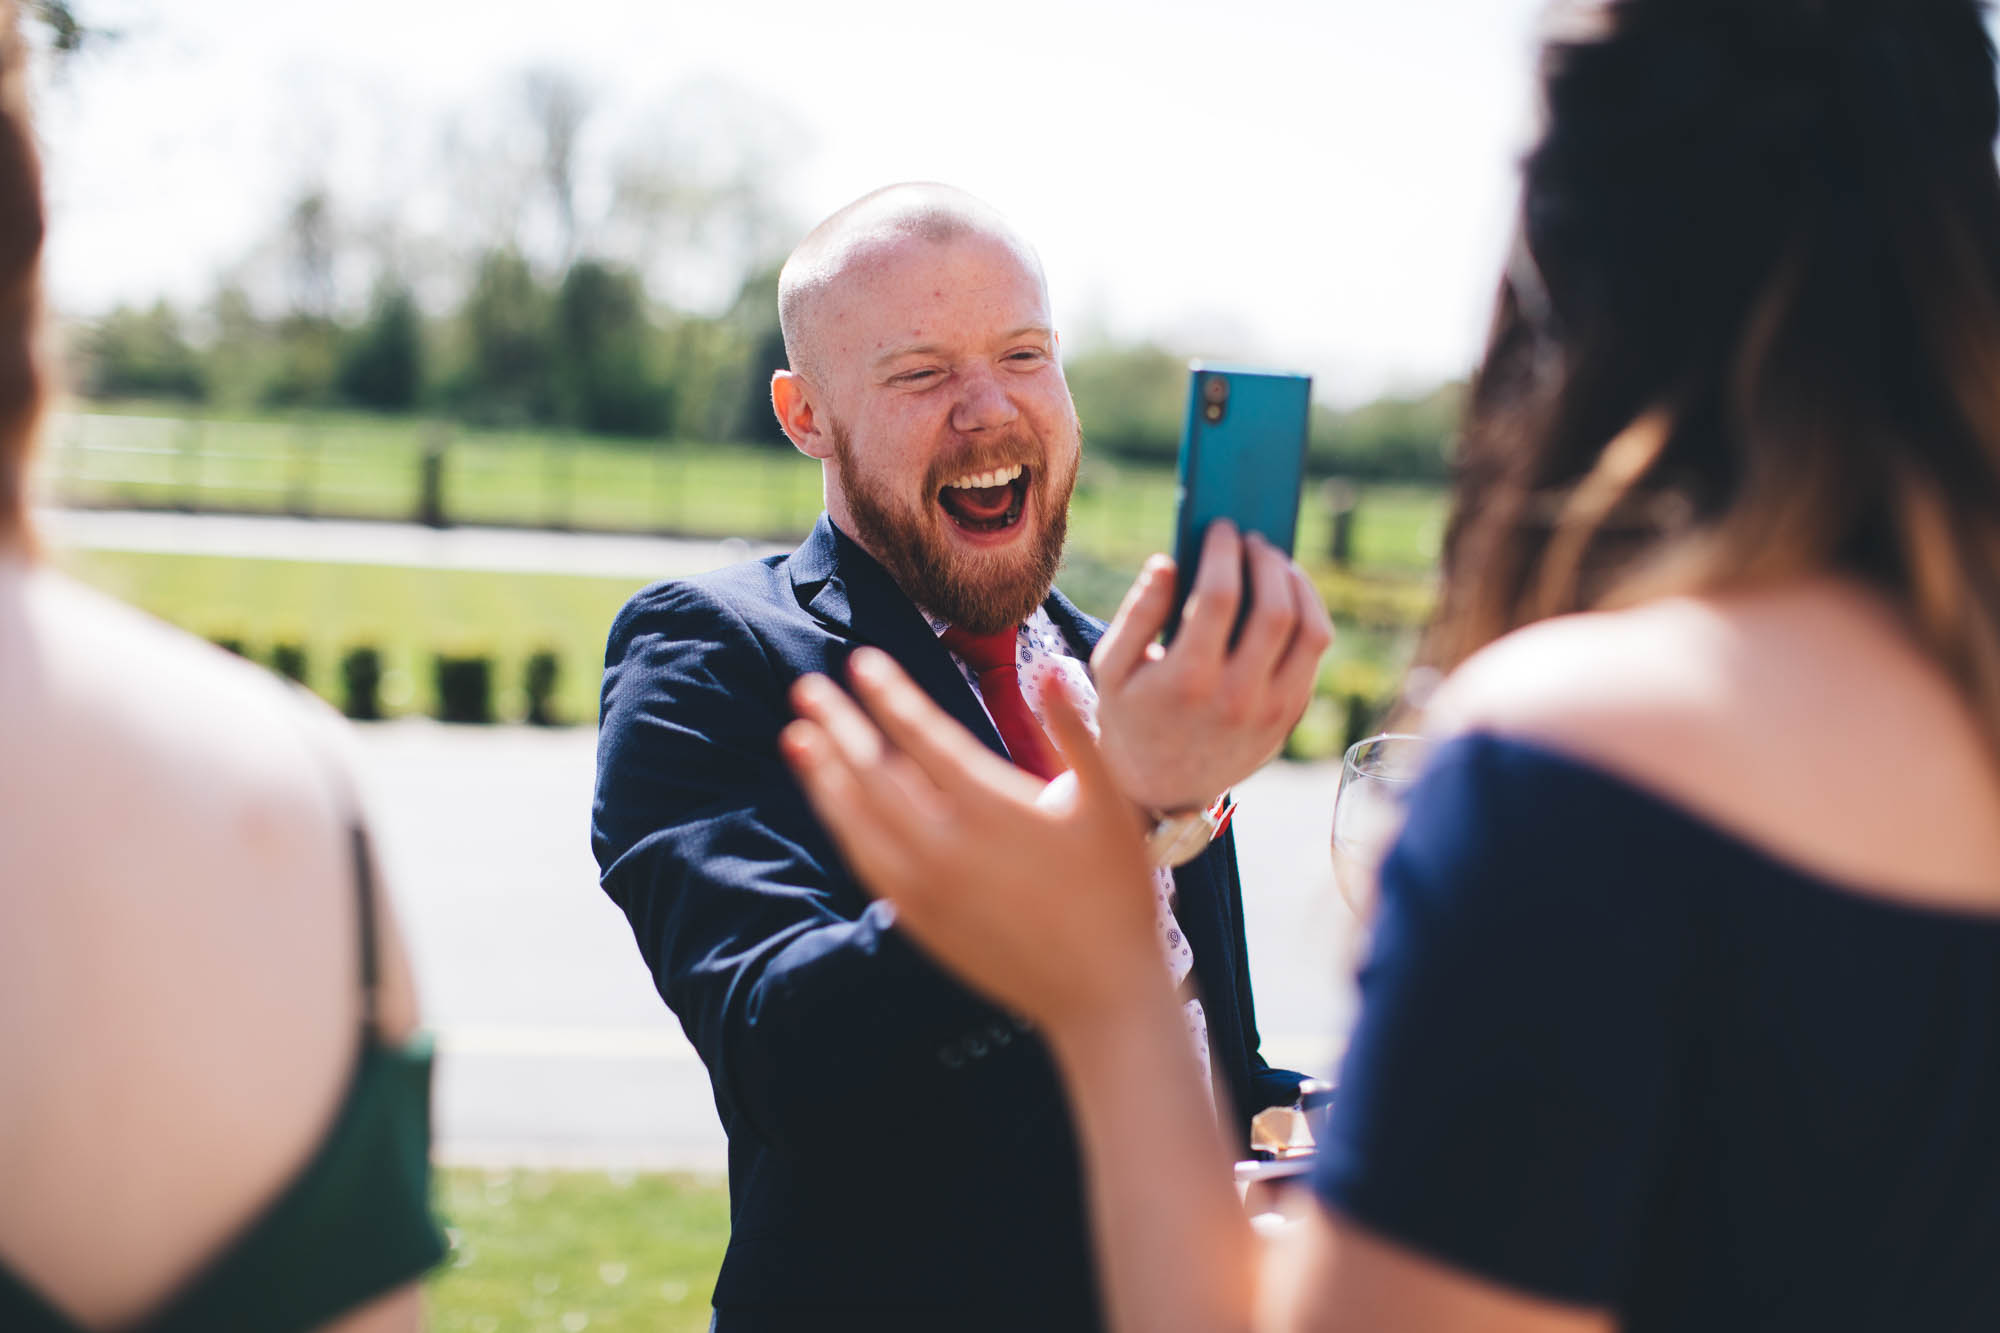 Wedding guest takes a funny photo on his phone of another guest